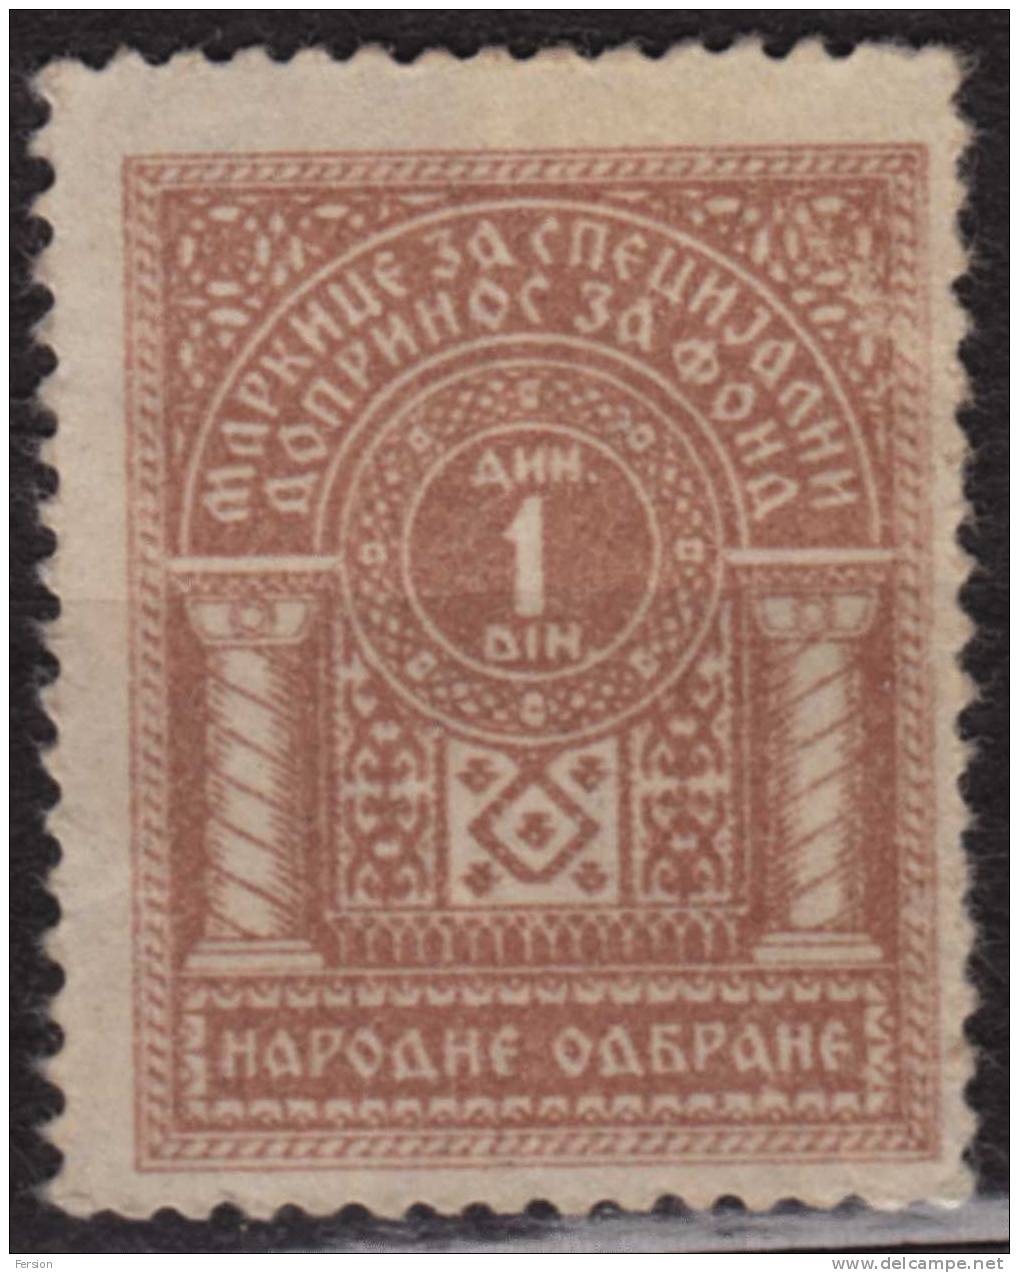 1930's Yugoslavia - MILITARY Stamp For Home Defense - Charity TAX LABEL VIGNETTE CINDERELLA Revenue Stamp 1 Din - Used - Officials